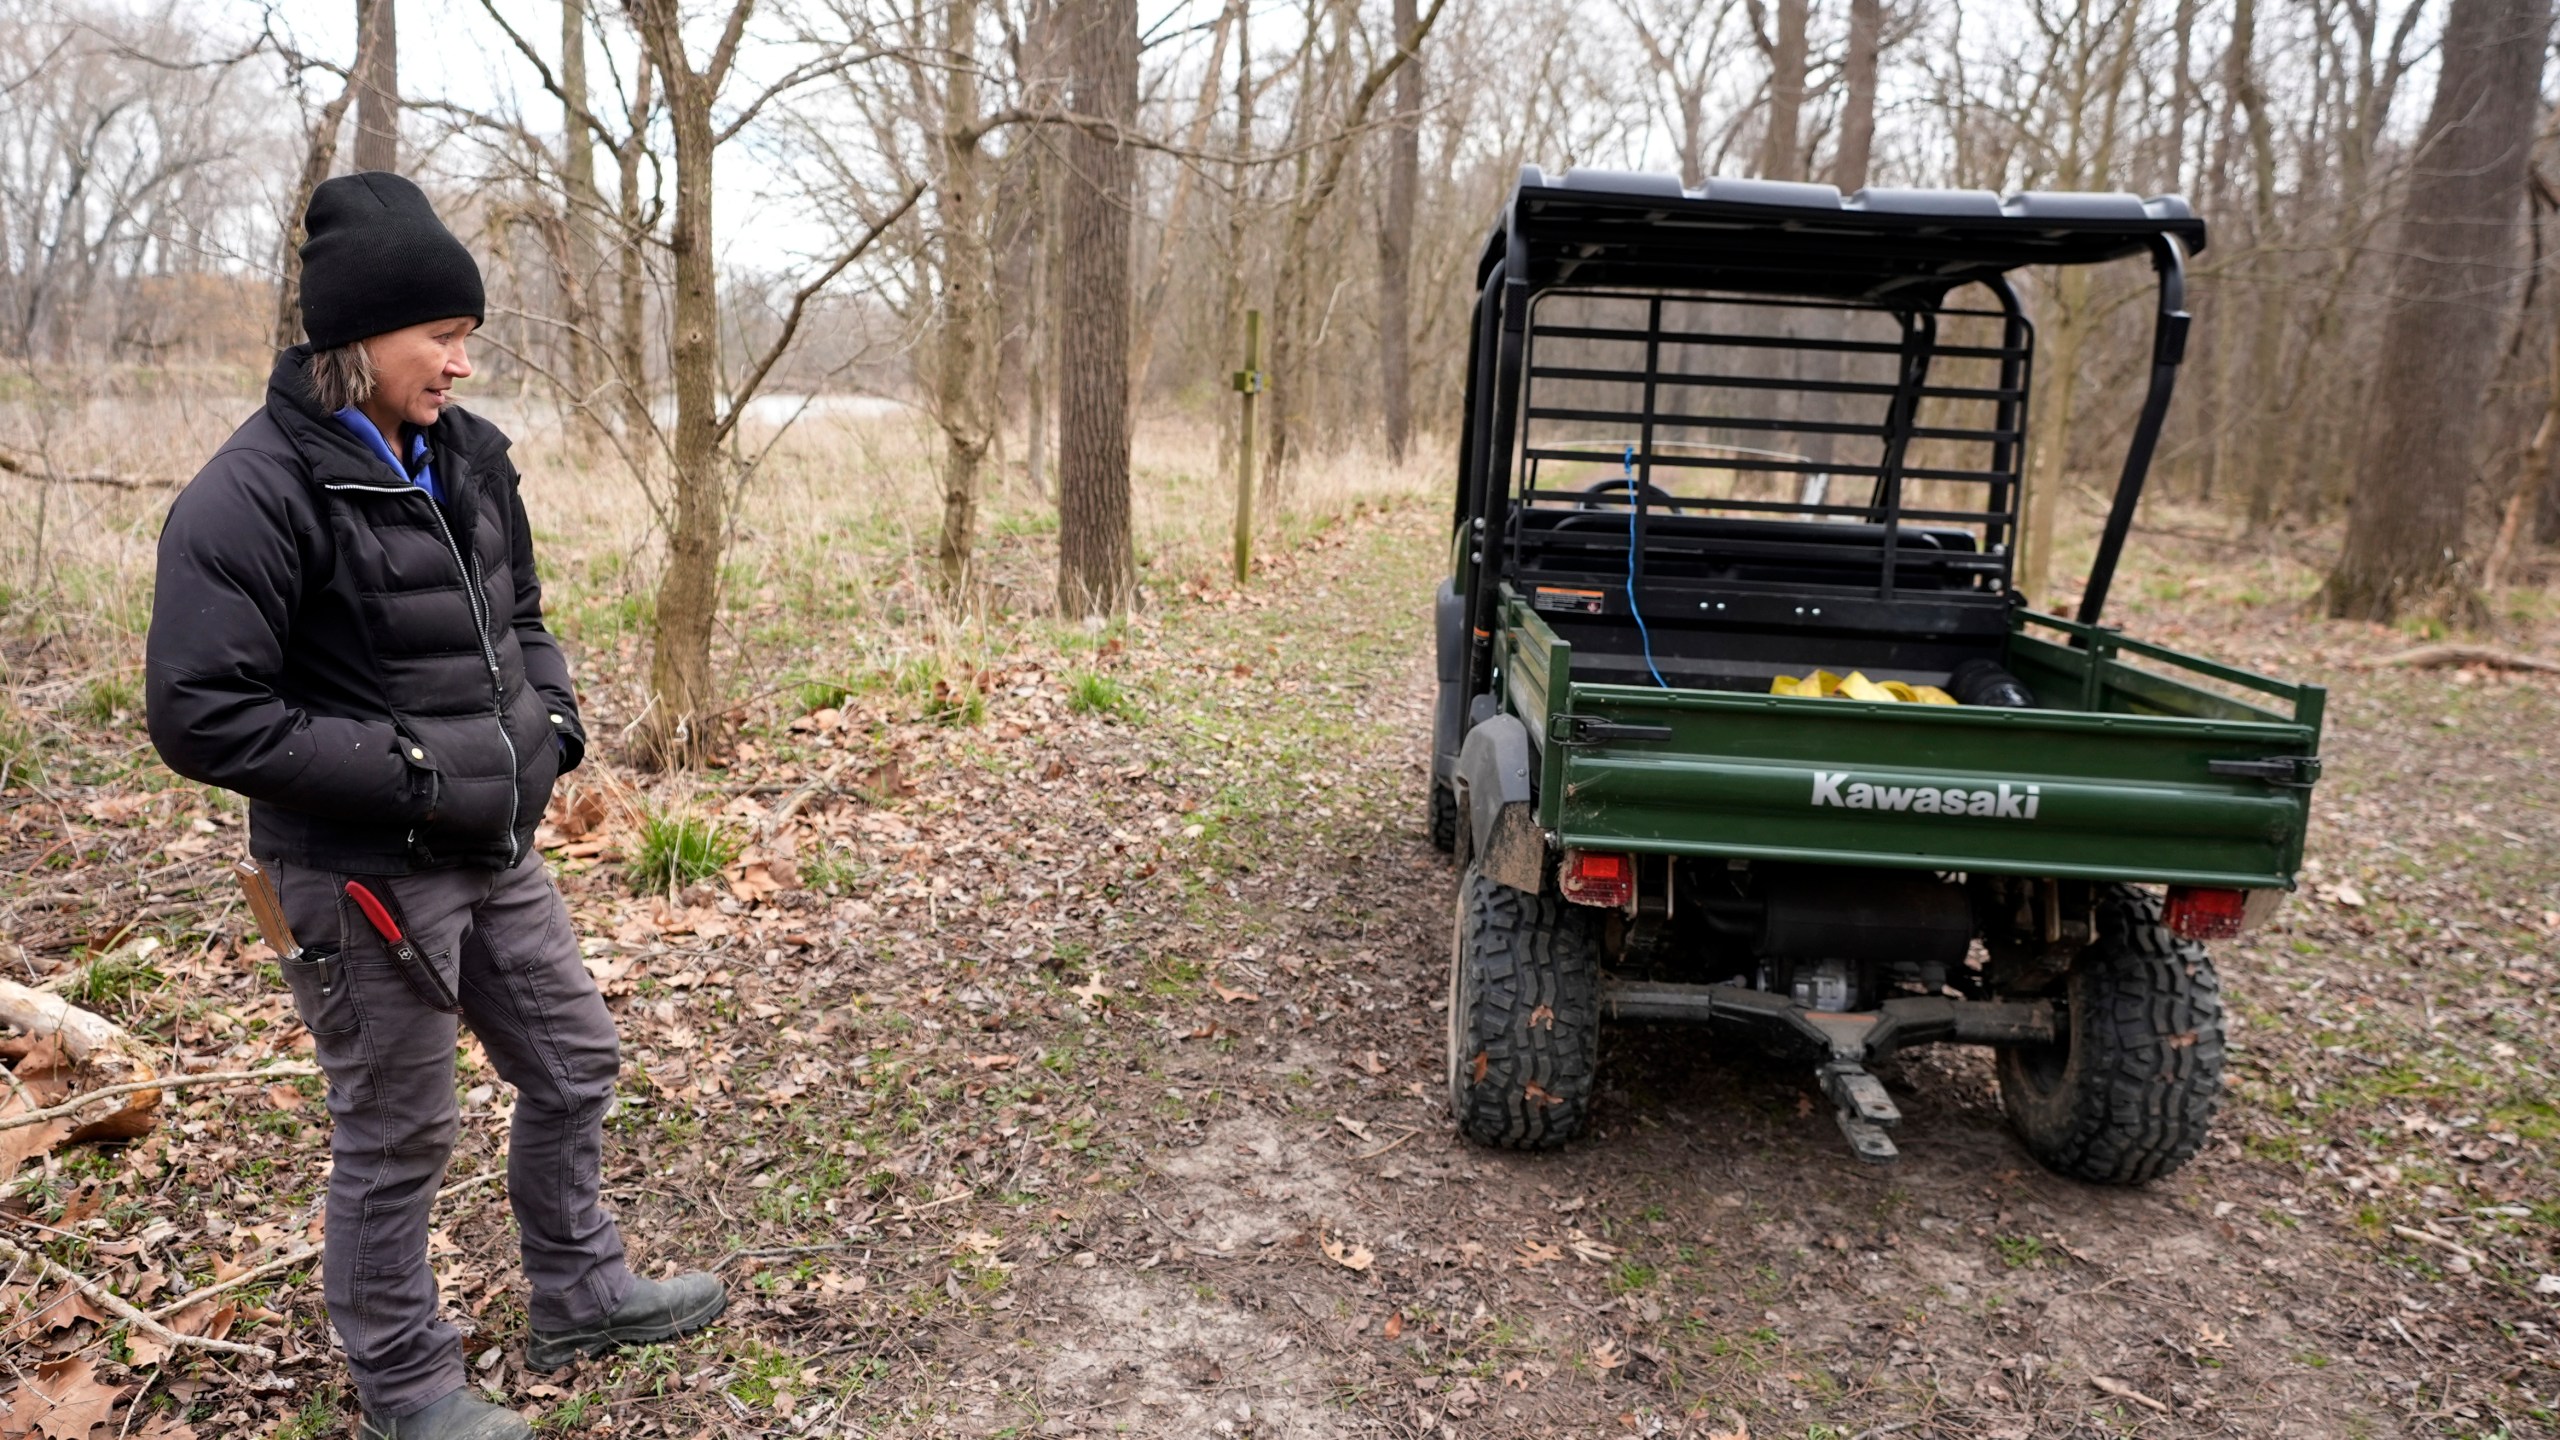 Katy Rogers, the farm manager at Teter Organic Farm and Retreat Center, stands by one of the public hiking trails at the facility, Thursday, March 21, 2024, in Noblesville, Ind. Rogers said in many cases it’s a misconception that organic farmers are harboring massive pest infestations. (AP Photo/Darron Cummings)